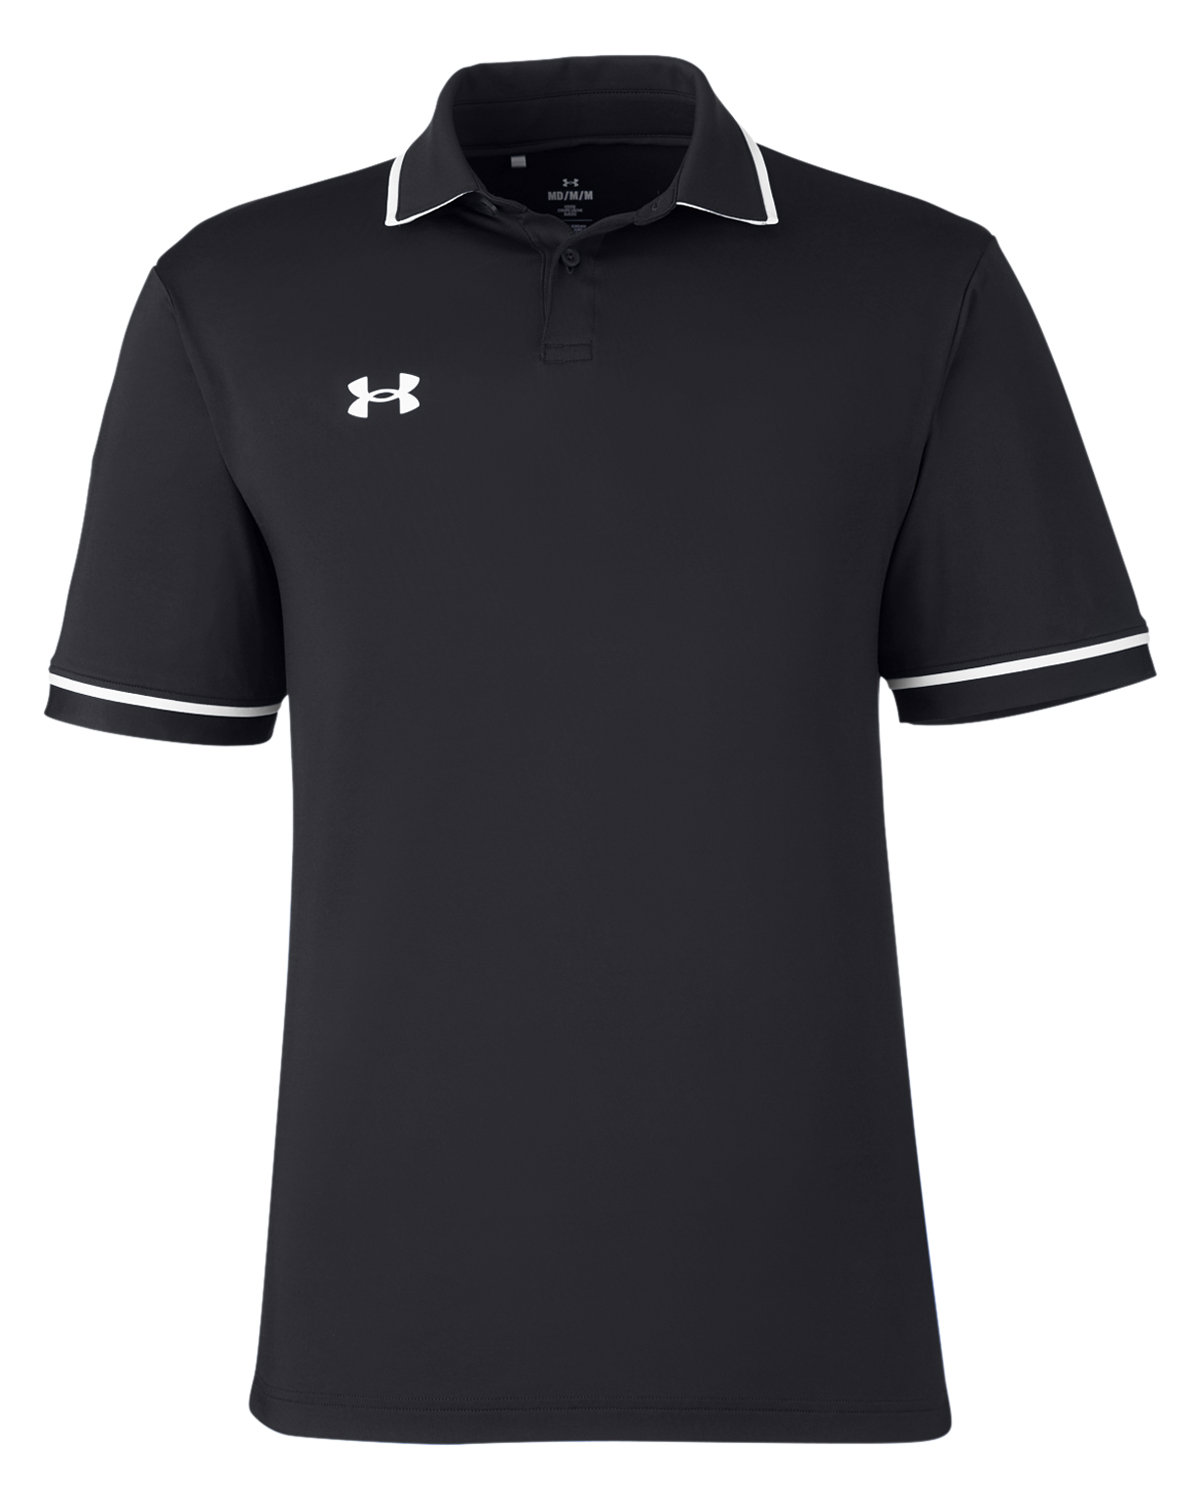 Under Armour 1376904 - Men's Tipped Teams Performance Polo